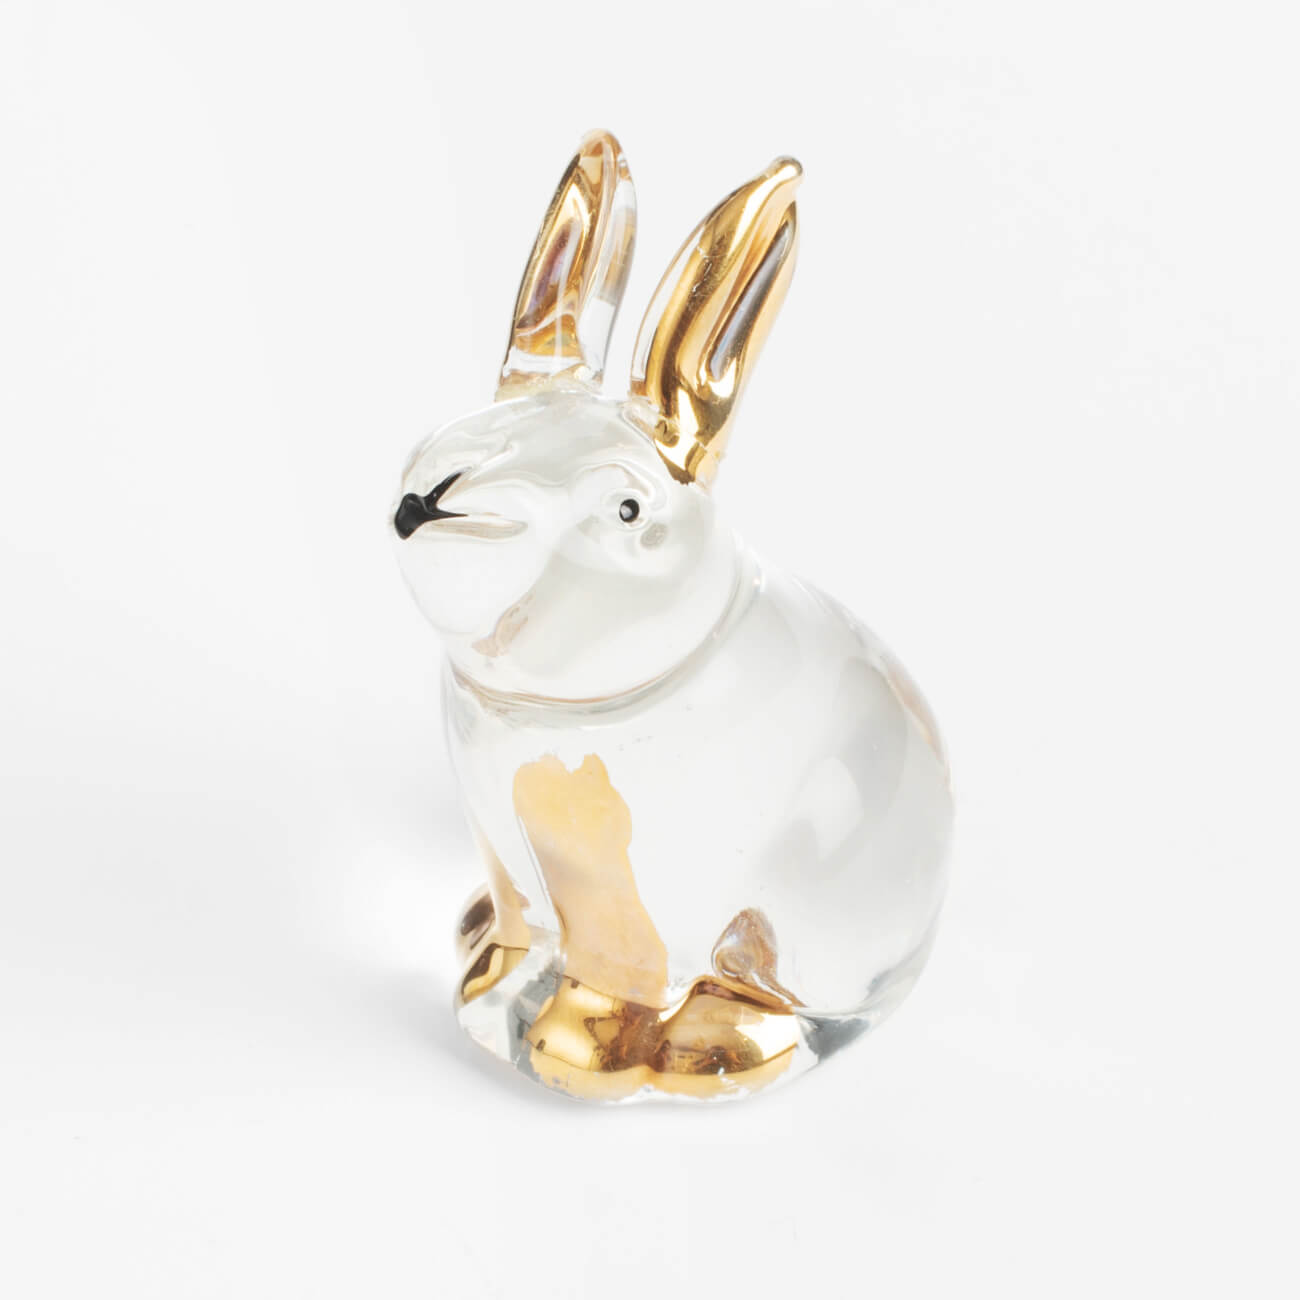 Statuette, 6 cm, glass, Rabbit with golden ears and paws, Vitreous изображение № 1